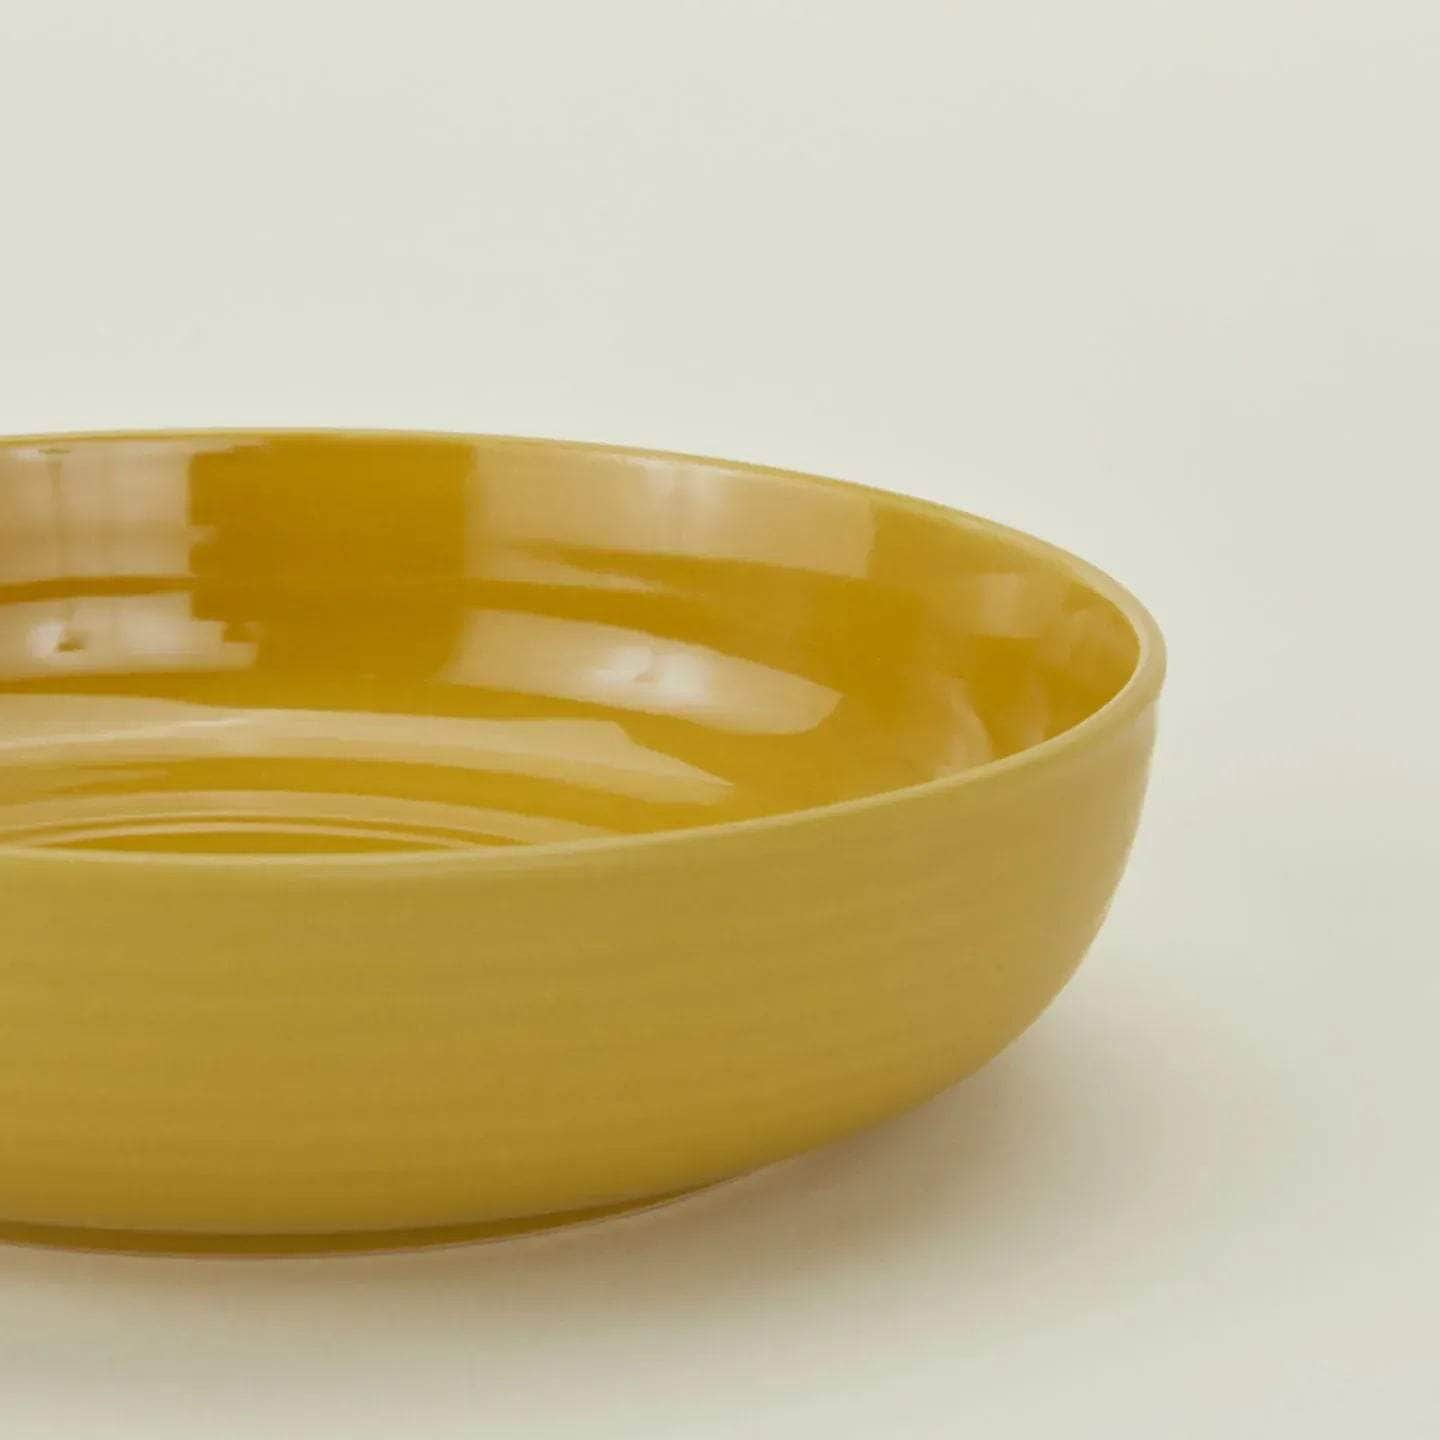 Load image into Gallery viewer, Essential Low Bowl - Set Of 4, Mustard
